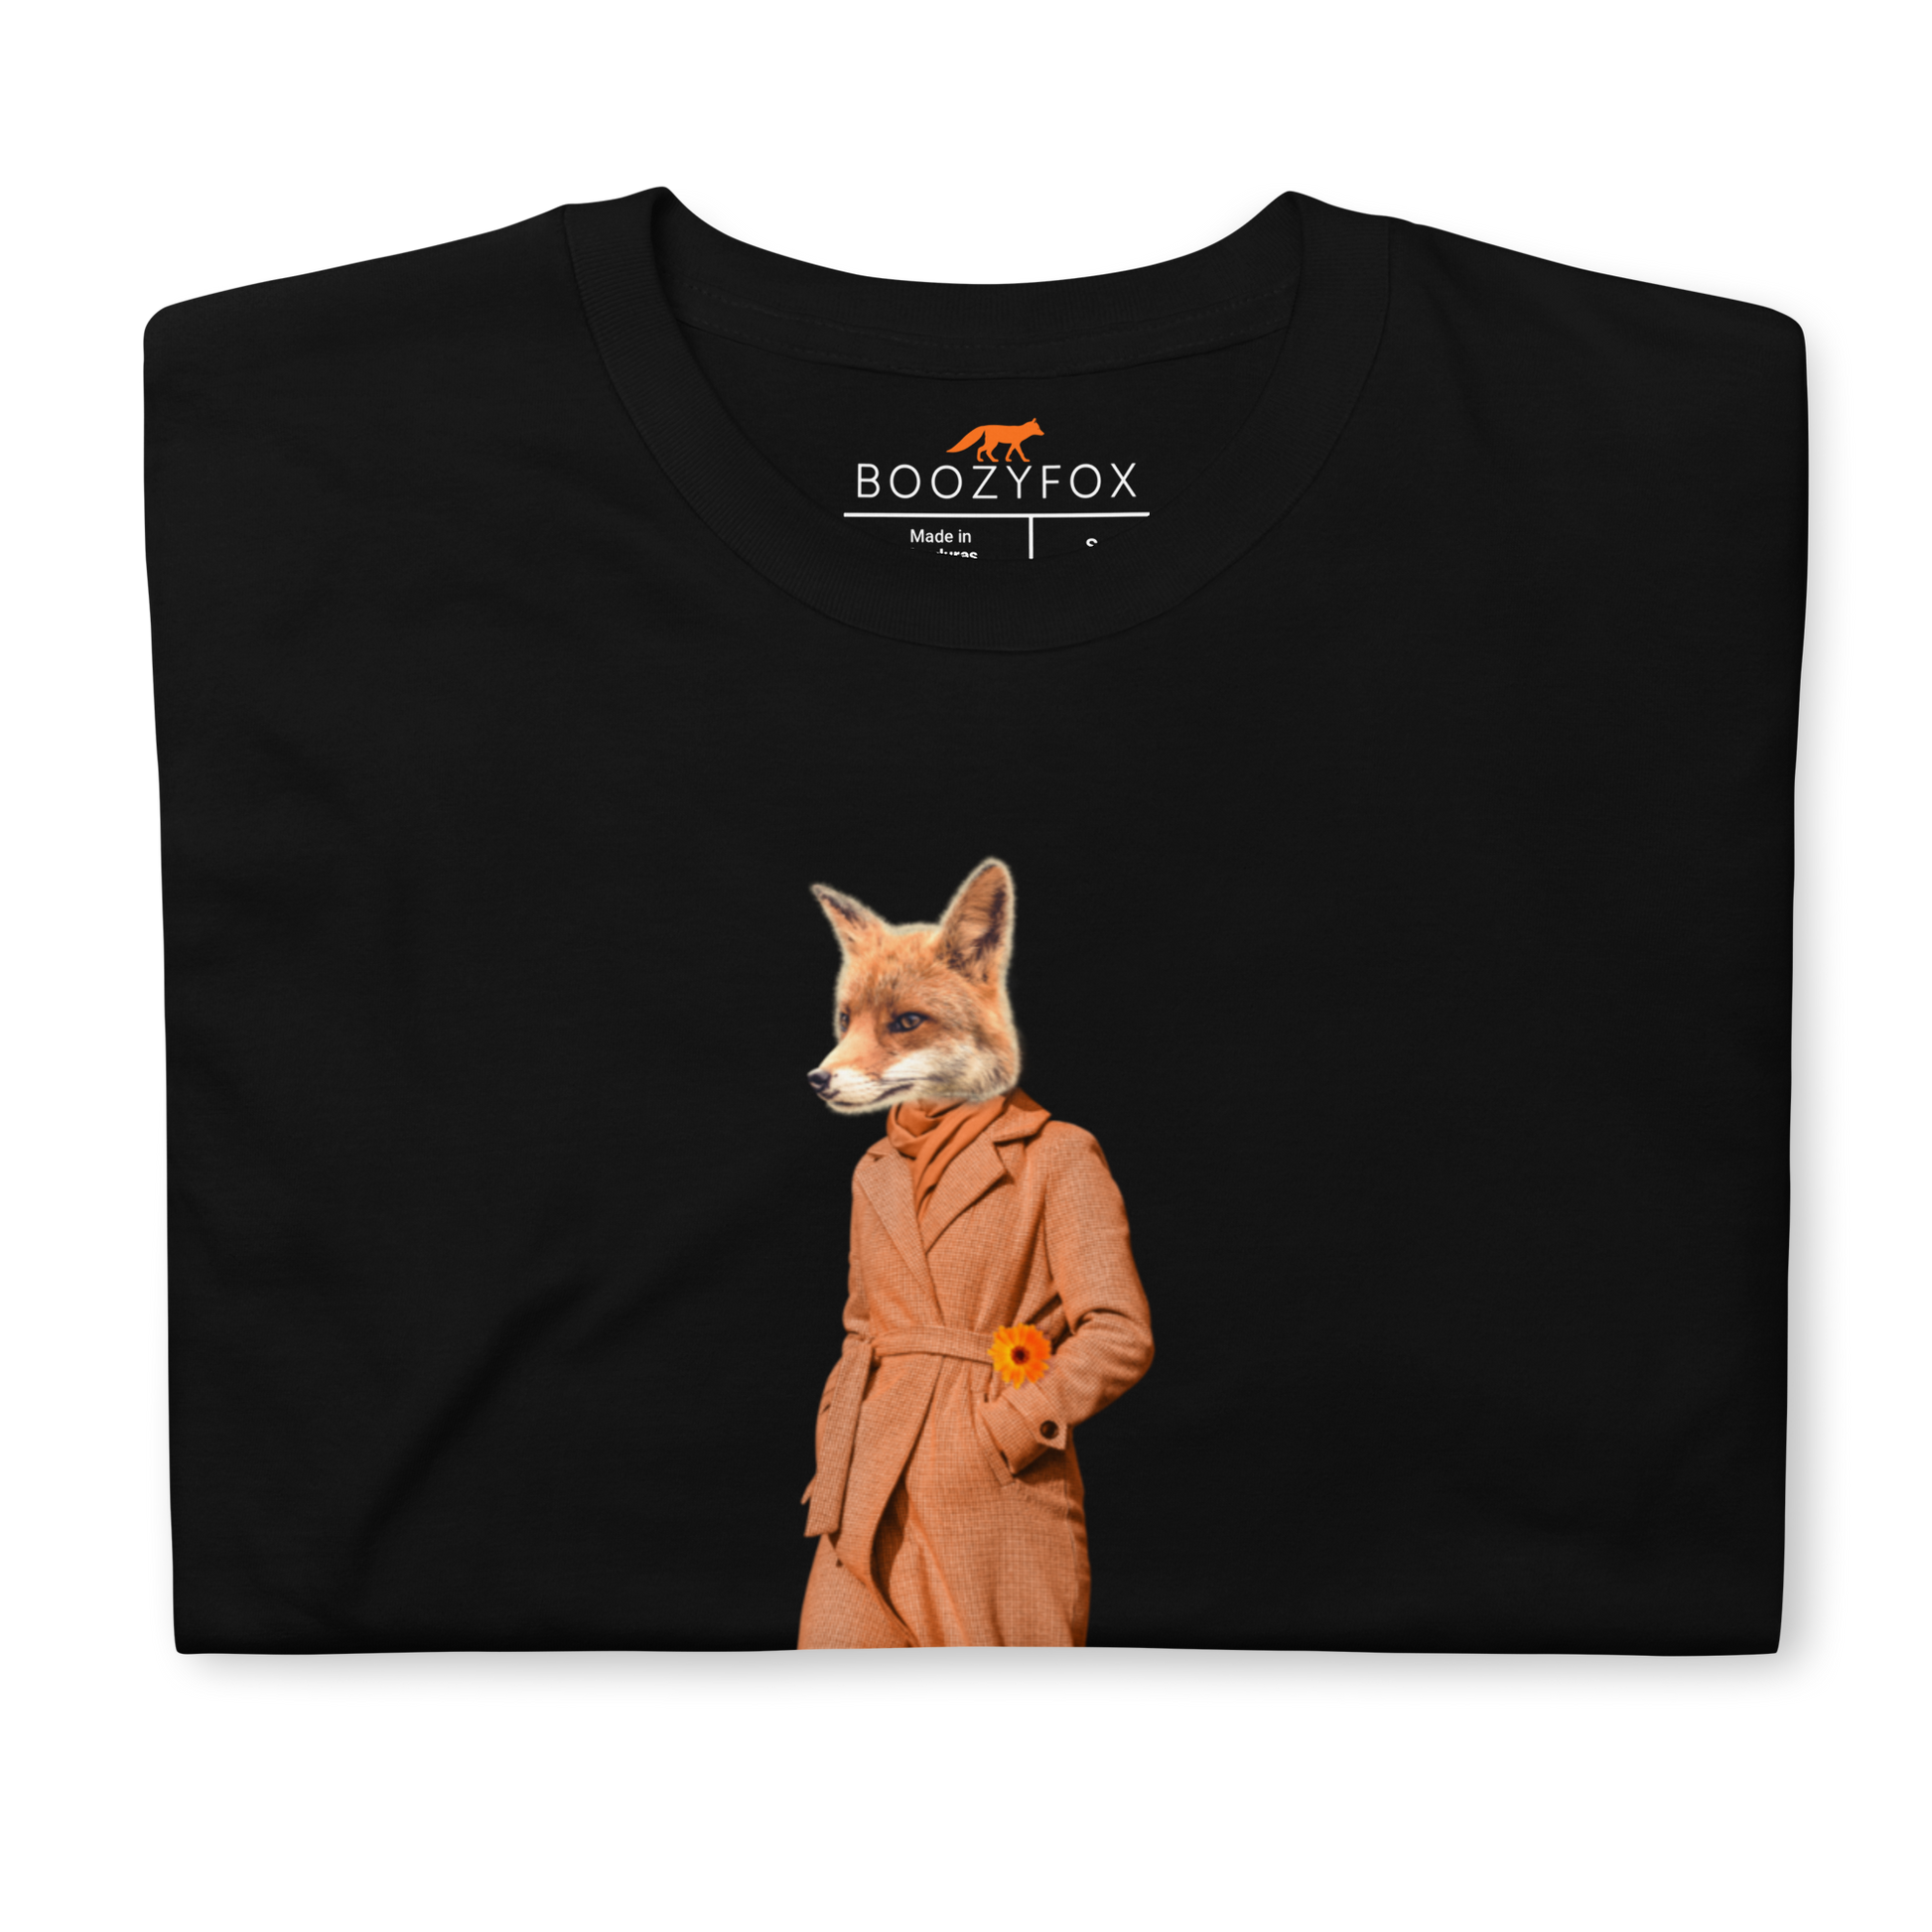 Front Details of a Black Anthropomorphic Fox T-Shirt featuring a sly Anthropomorphic Fox In a Trench Coat graphic on the chest - Funny Graphic Fox T-Shirts - Boozy Fox